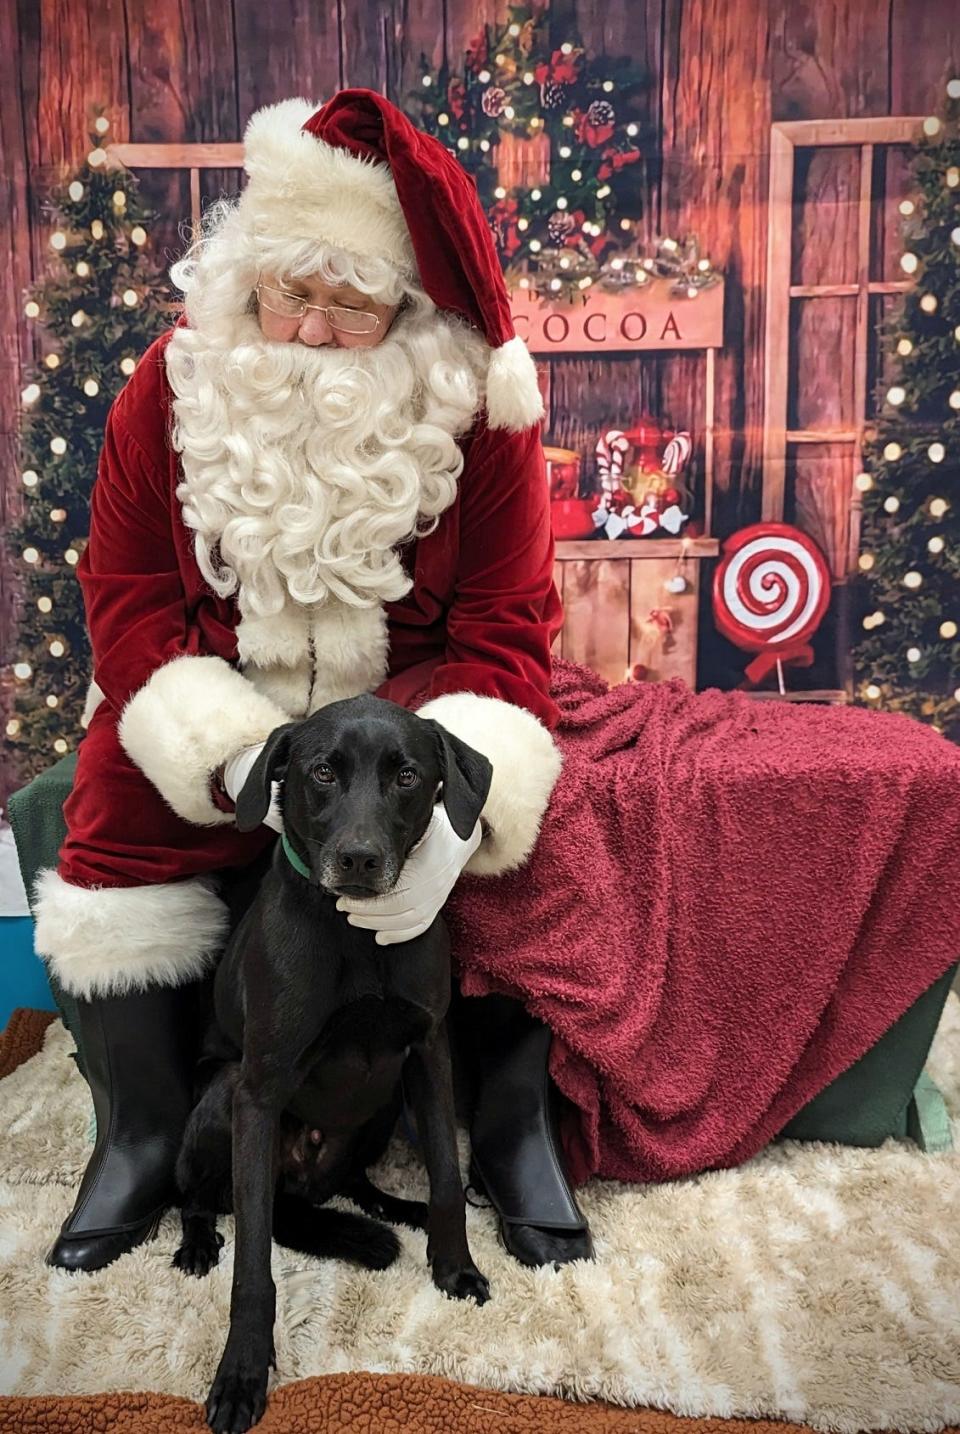 Blakely, ID #294118, is a wonderful Labrador who is very gentle and has a big heart of gold. He is 5 years old and weighs 57-pounds. Blakely was adopted from the shelter when he was a pup. He came in as a stray on Oct. 4, and he was not reclaimed. He's a gentle dog who responds to pet and hugs like he's not received enough of them in his life. Blakely is good with dogs of all sizes. He will be a terrific indoor companion, and he'll let you know when visitors come to your home. To meet Blakely, go to the Oklahoma City Animal Shelter at 2811 SE 29 between noon and 5 p.m. Tuesday through Saturday. Go online to www.okc.gov or www.okc.petfinder.com to see all the cats and dogs available for adoption.